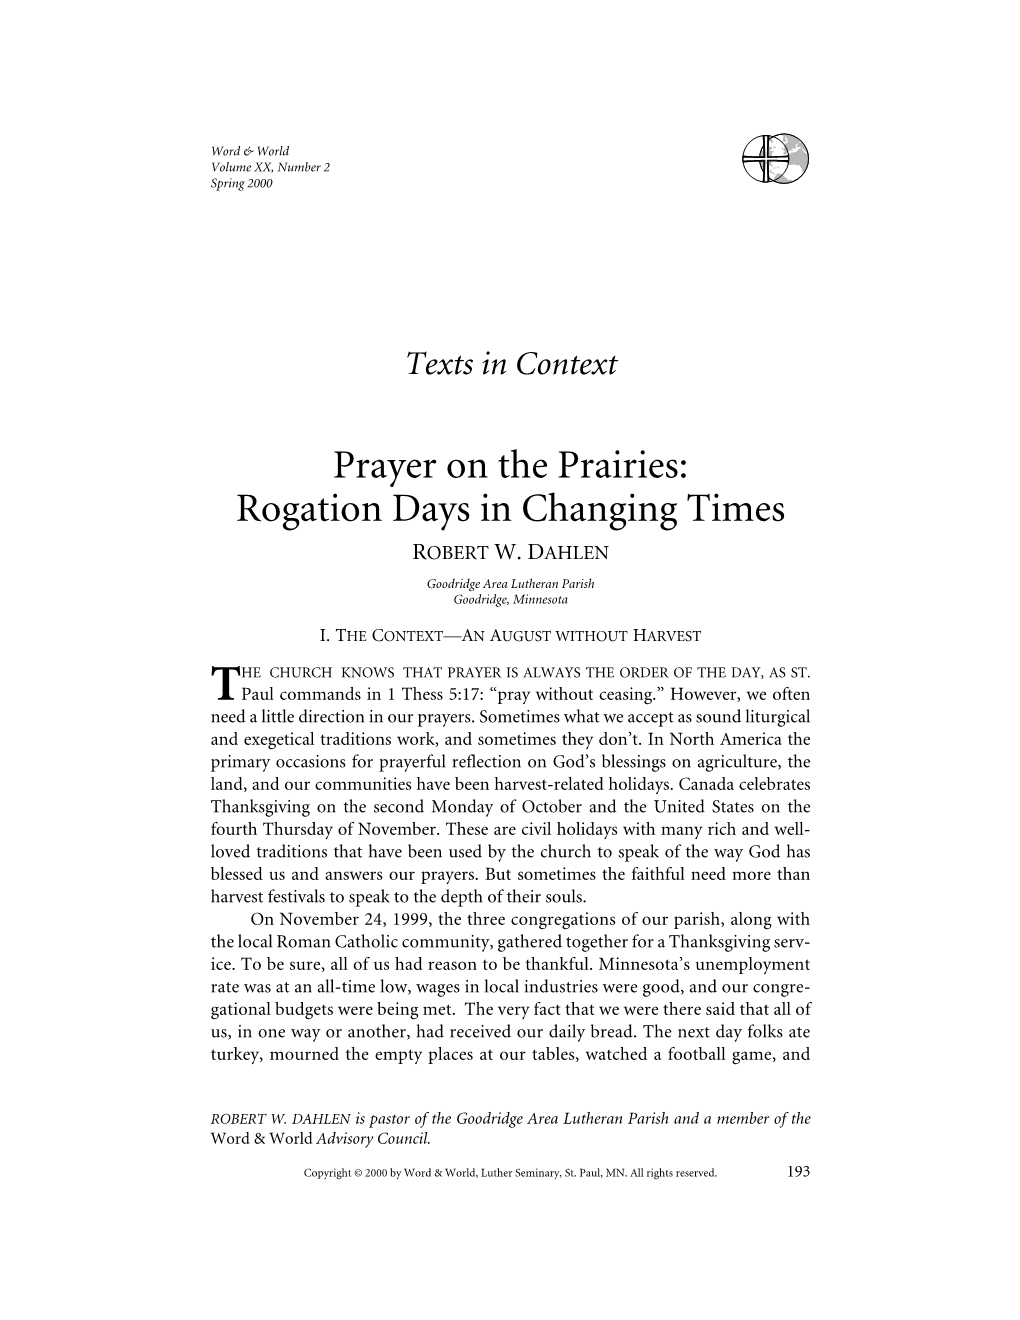 Prayer on the Prairies: Rogation Days in Changing Times ROBERT W